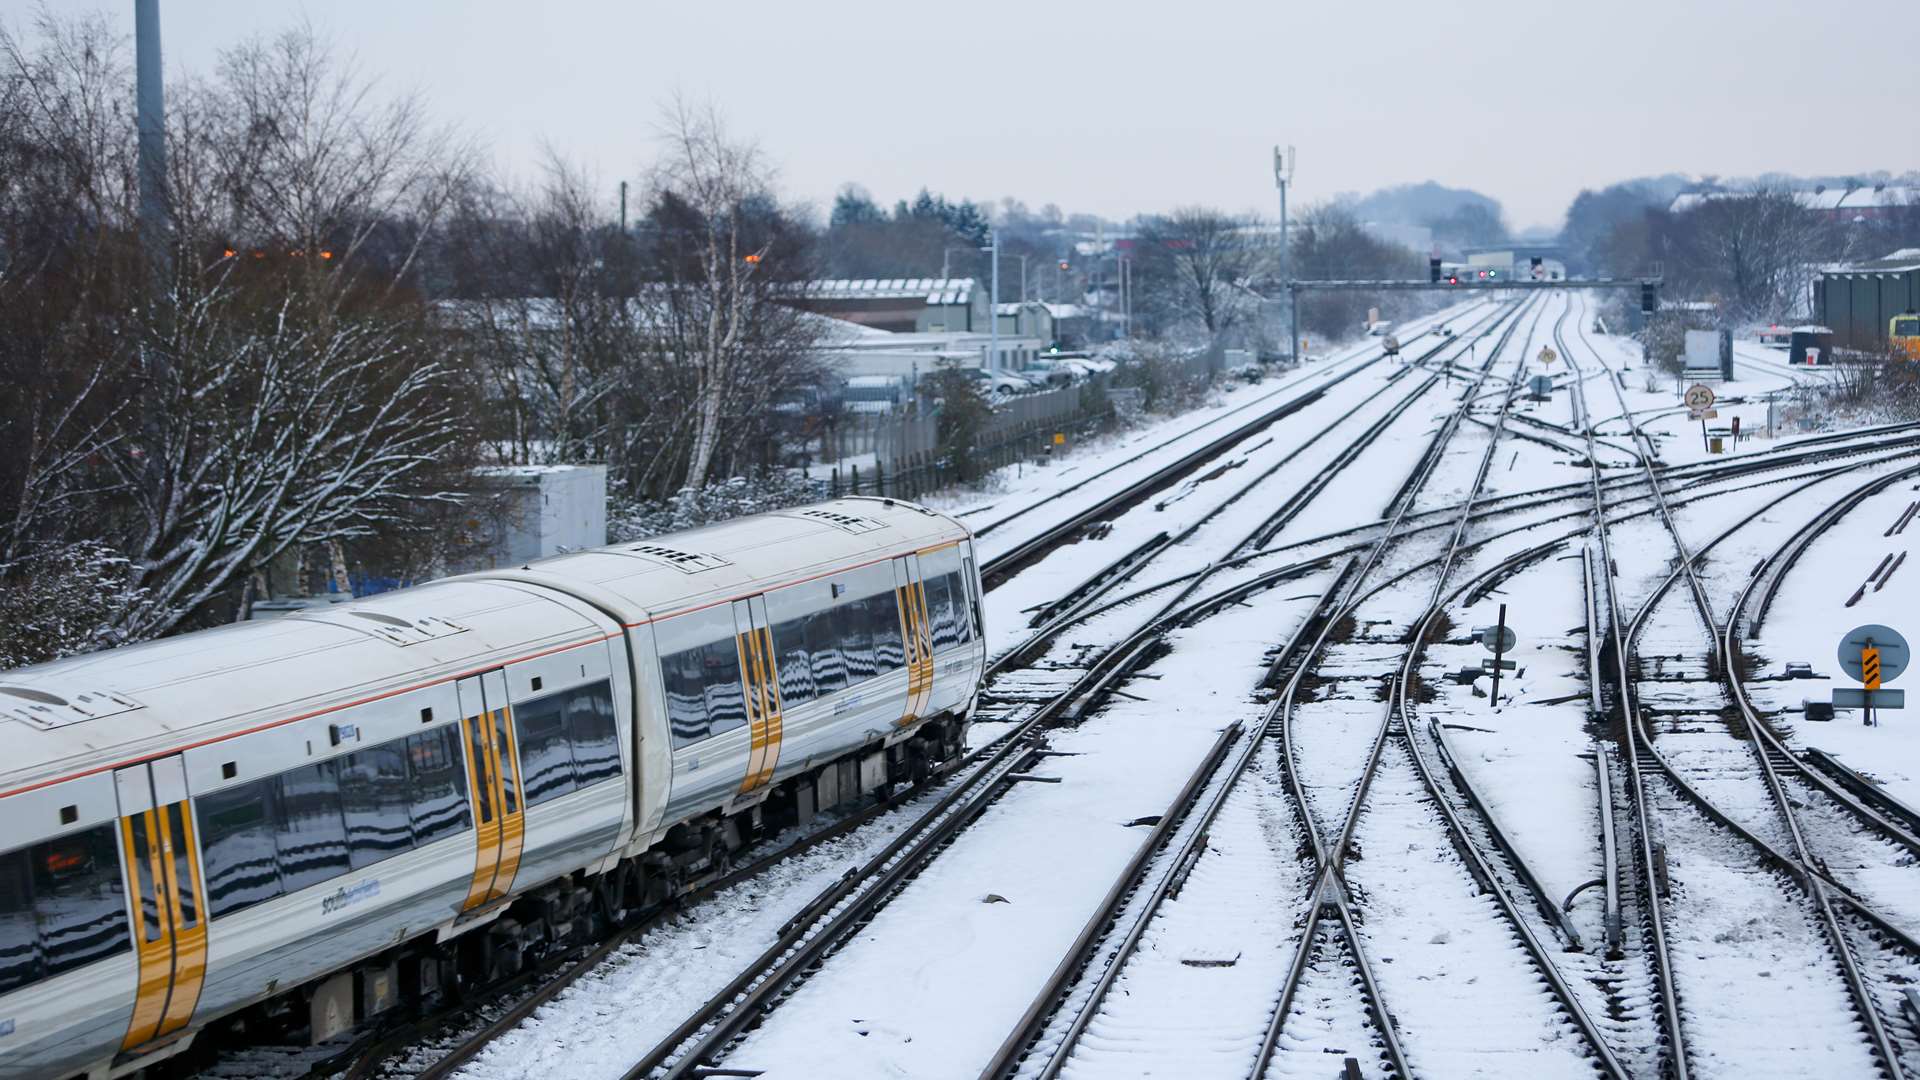 Train in the snow. Stock image.